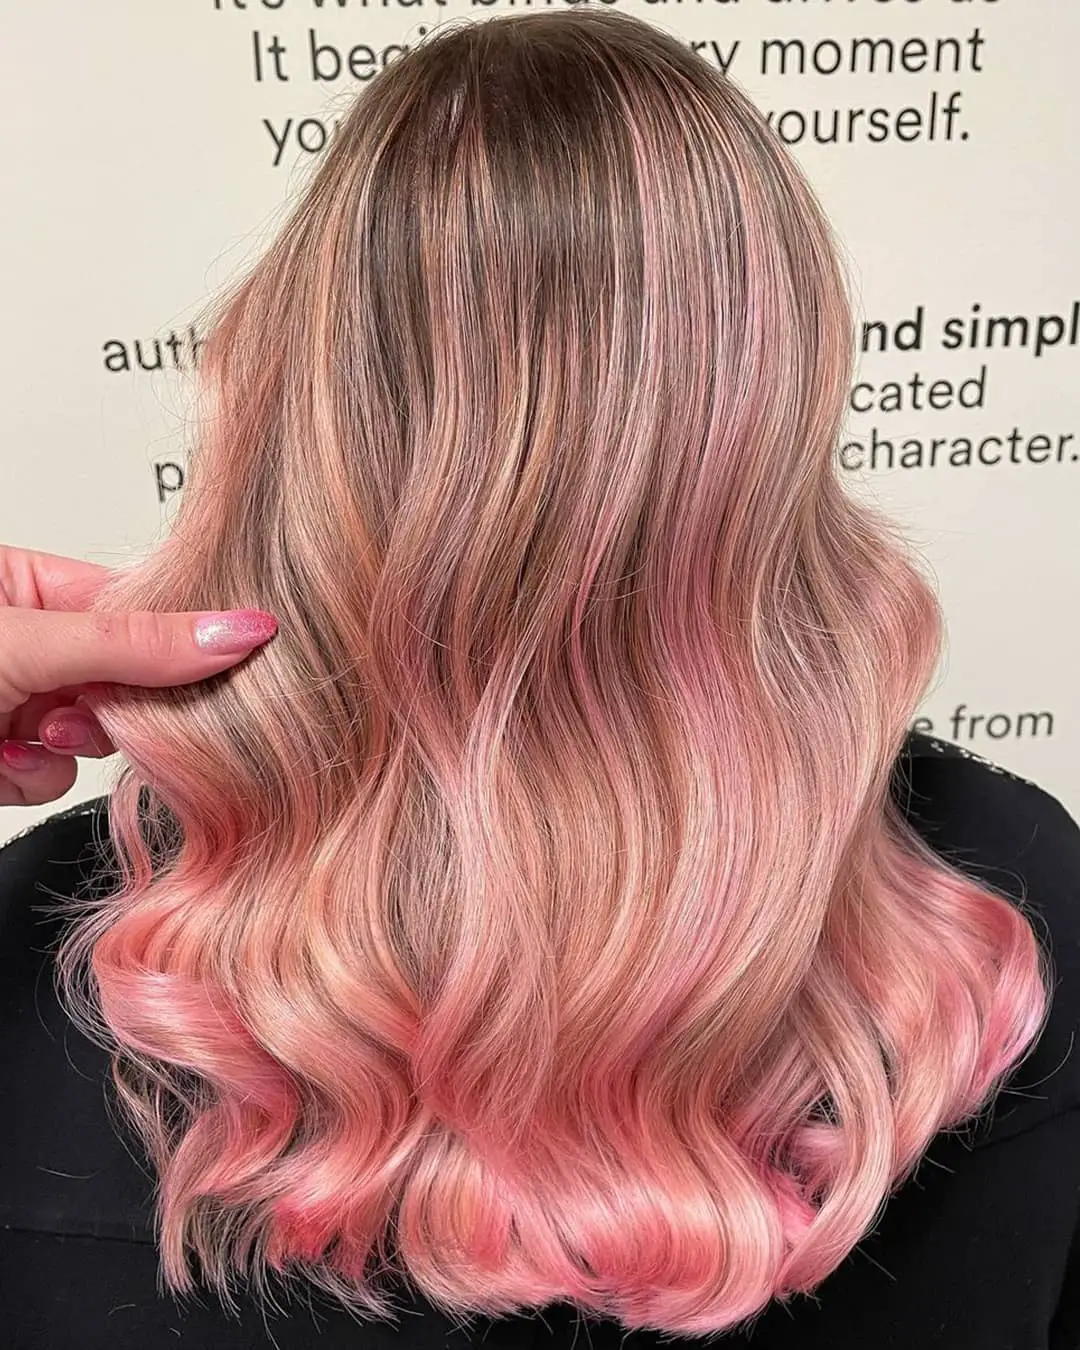 43-best-hairstyles-for-pink-hair Dusty Rose and Golden Waves